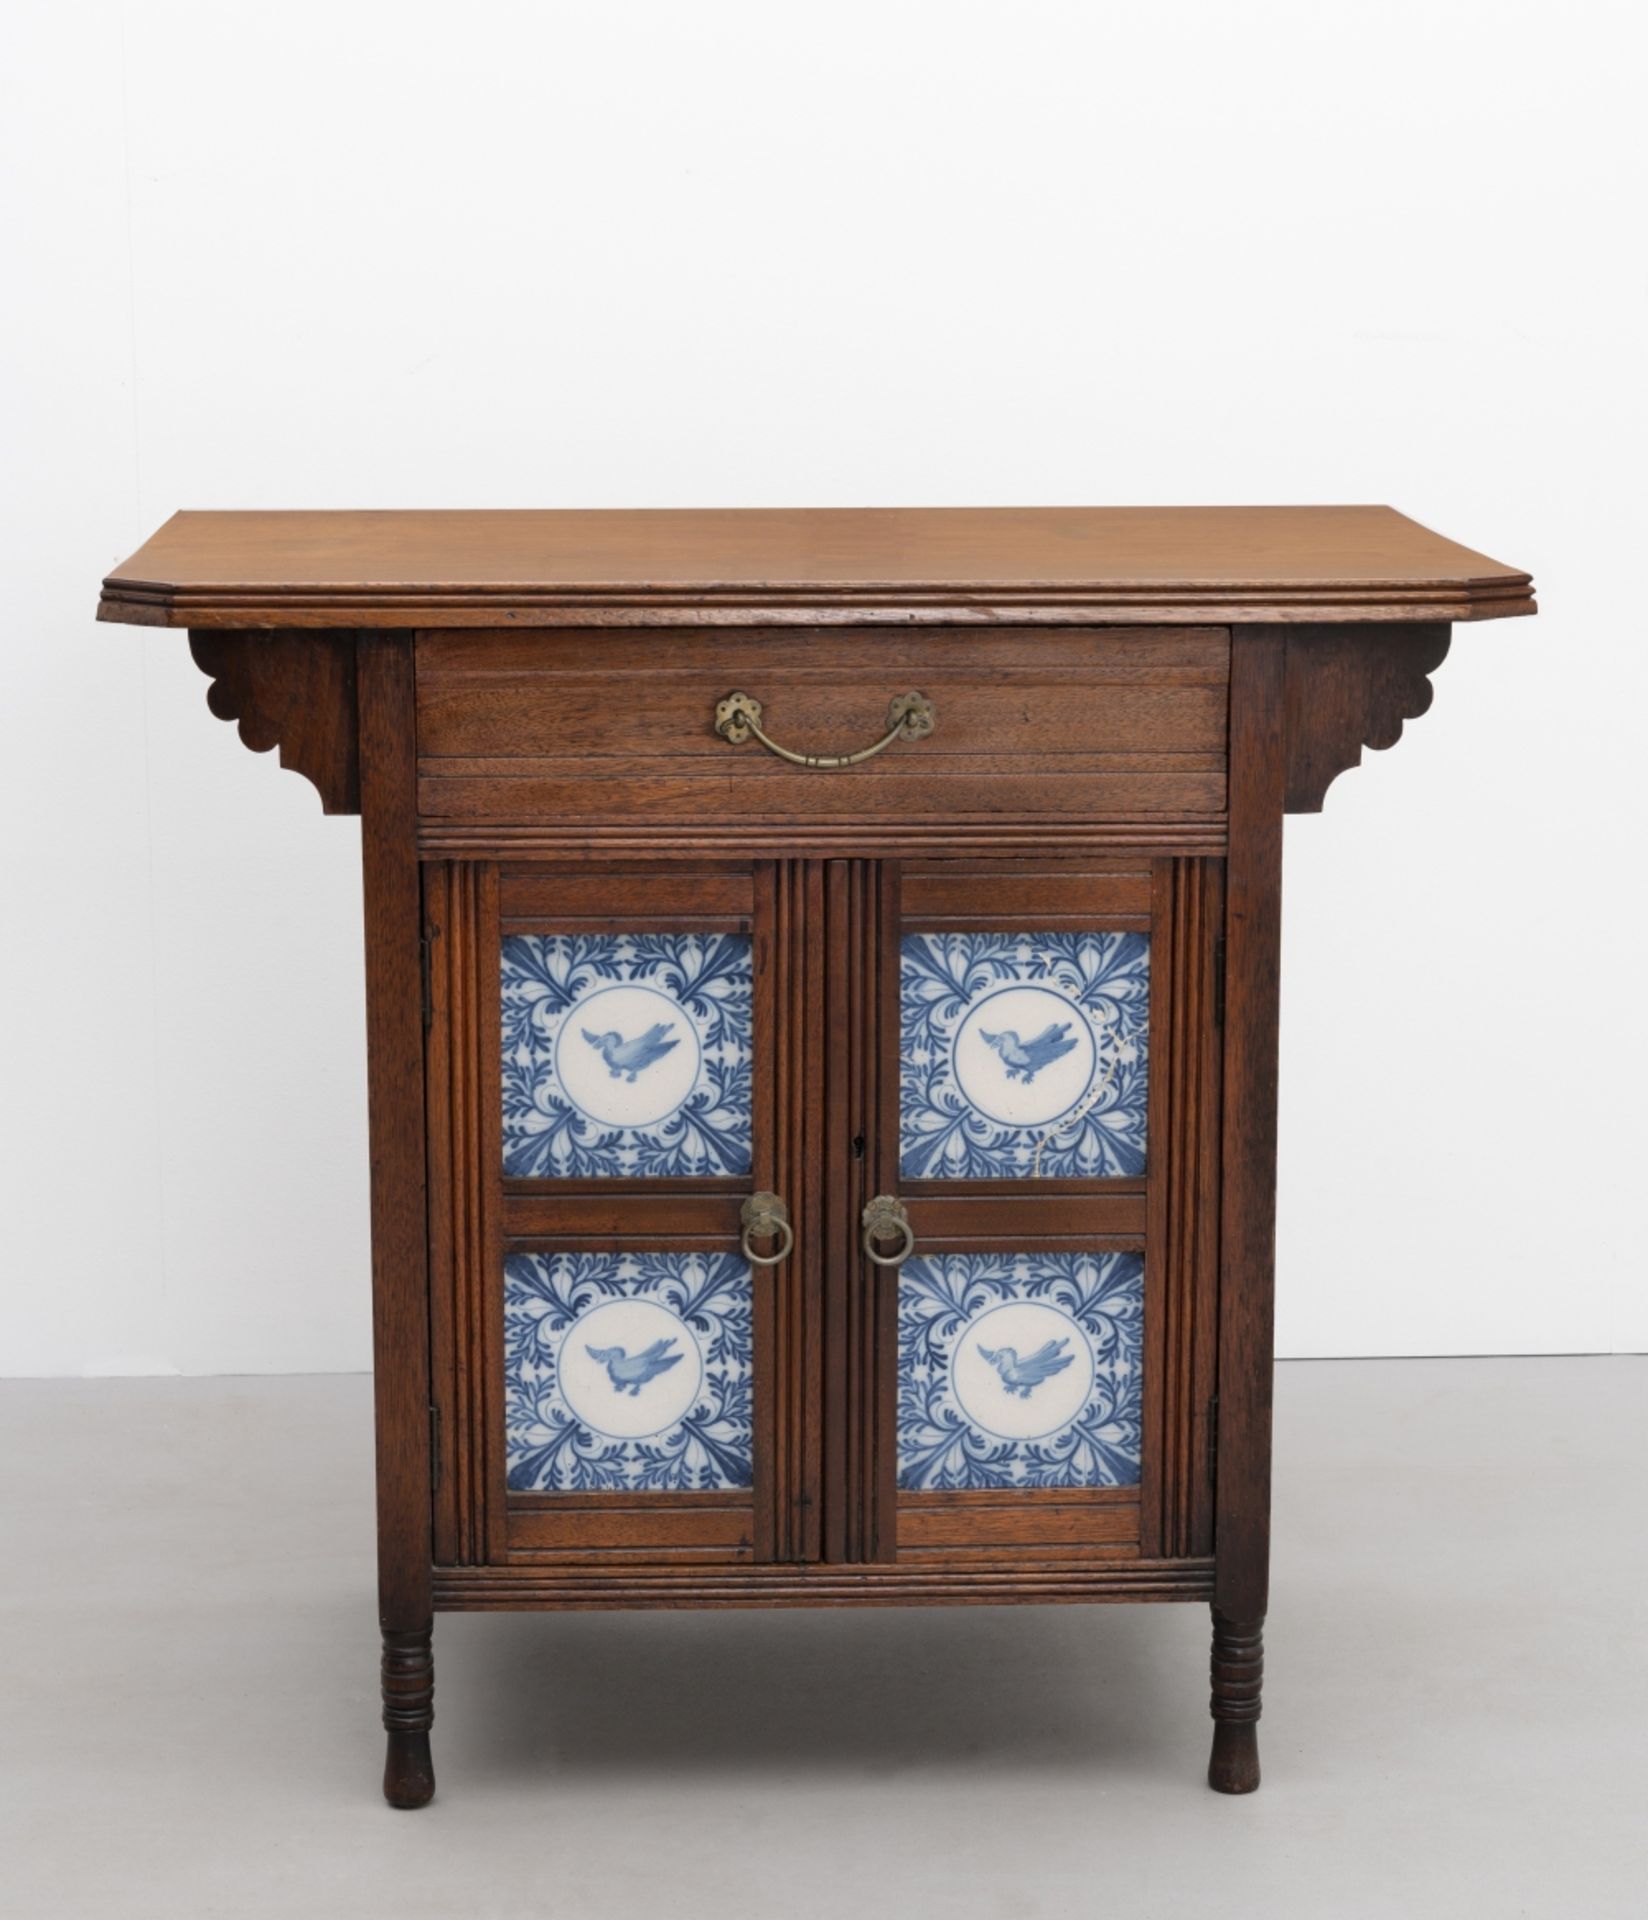 Attributed to E.W. Godwin Cabinet with inset tiles, circa 1877